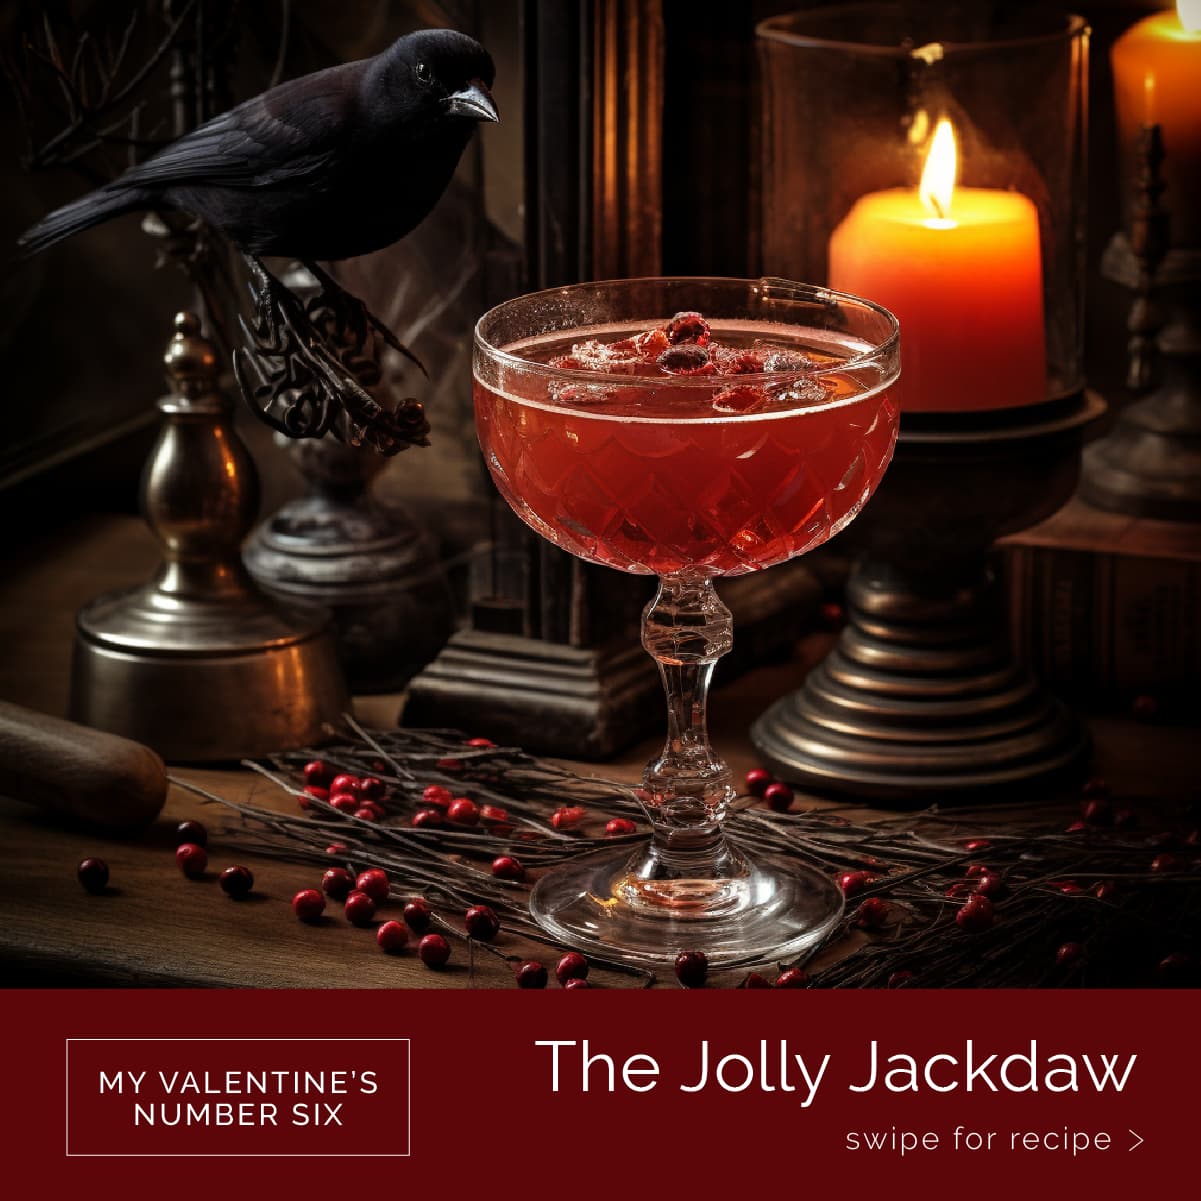 A Jolly Jackdaw cocktail